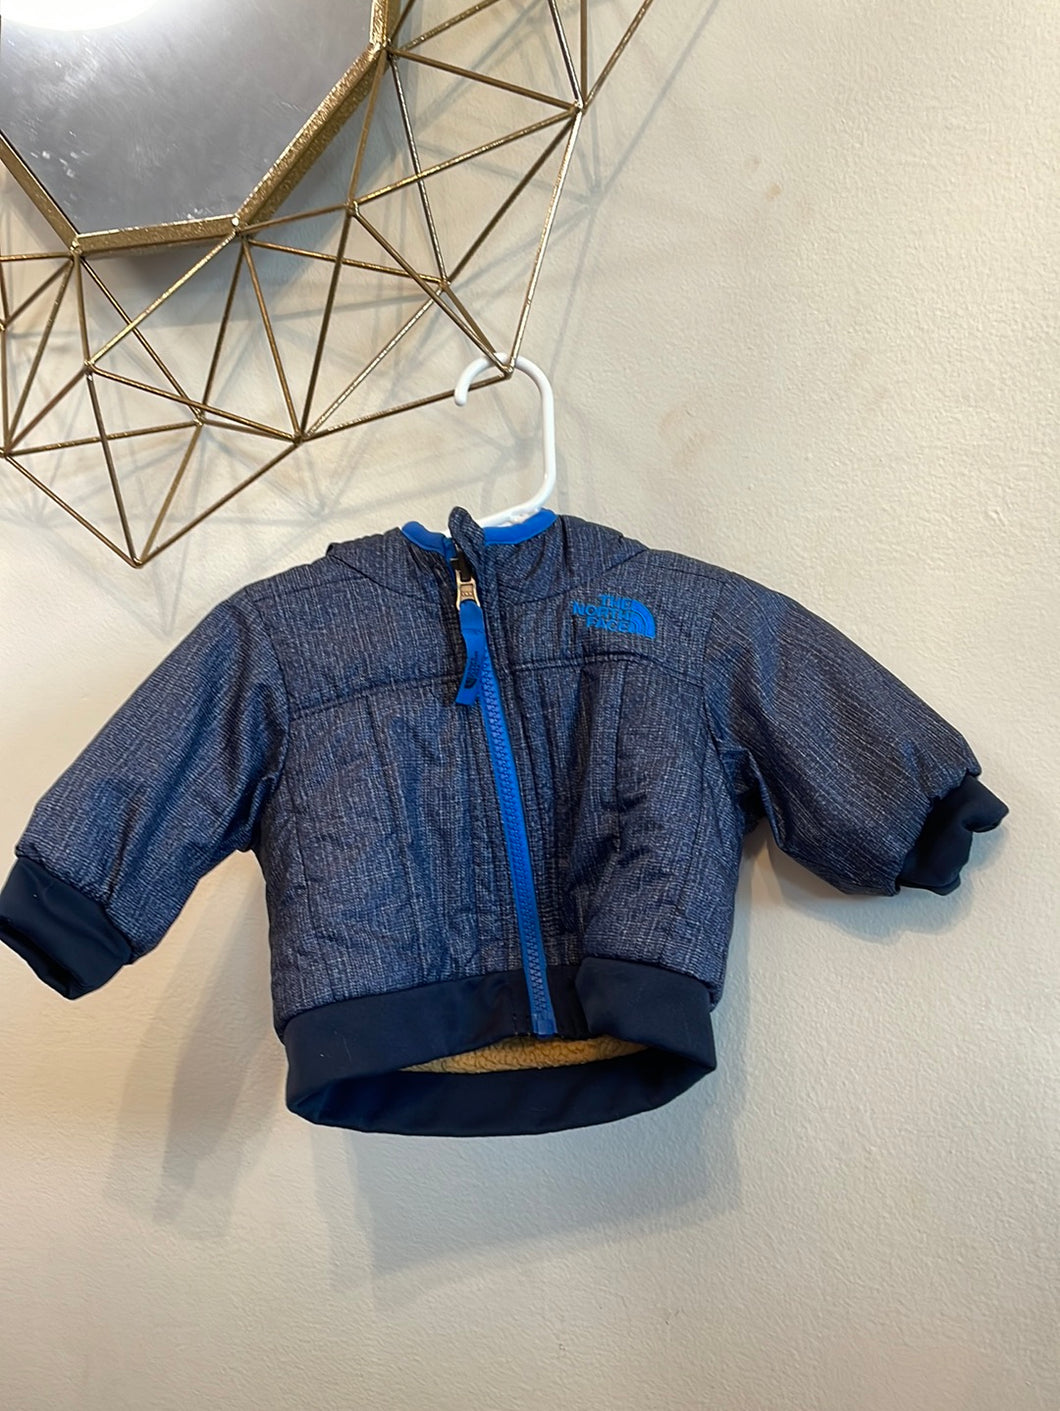 The North Face 0-3m jacket